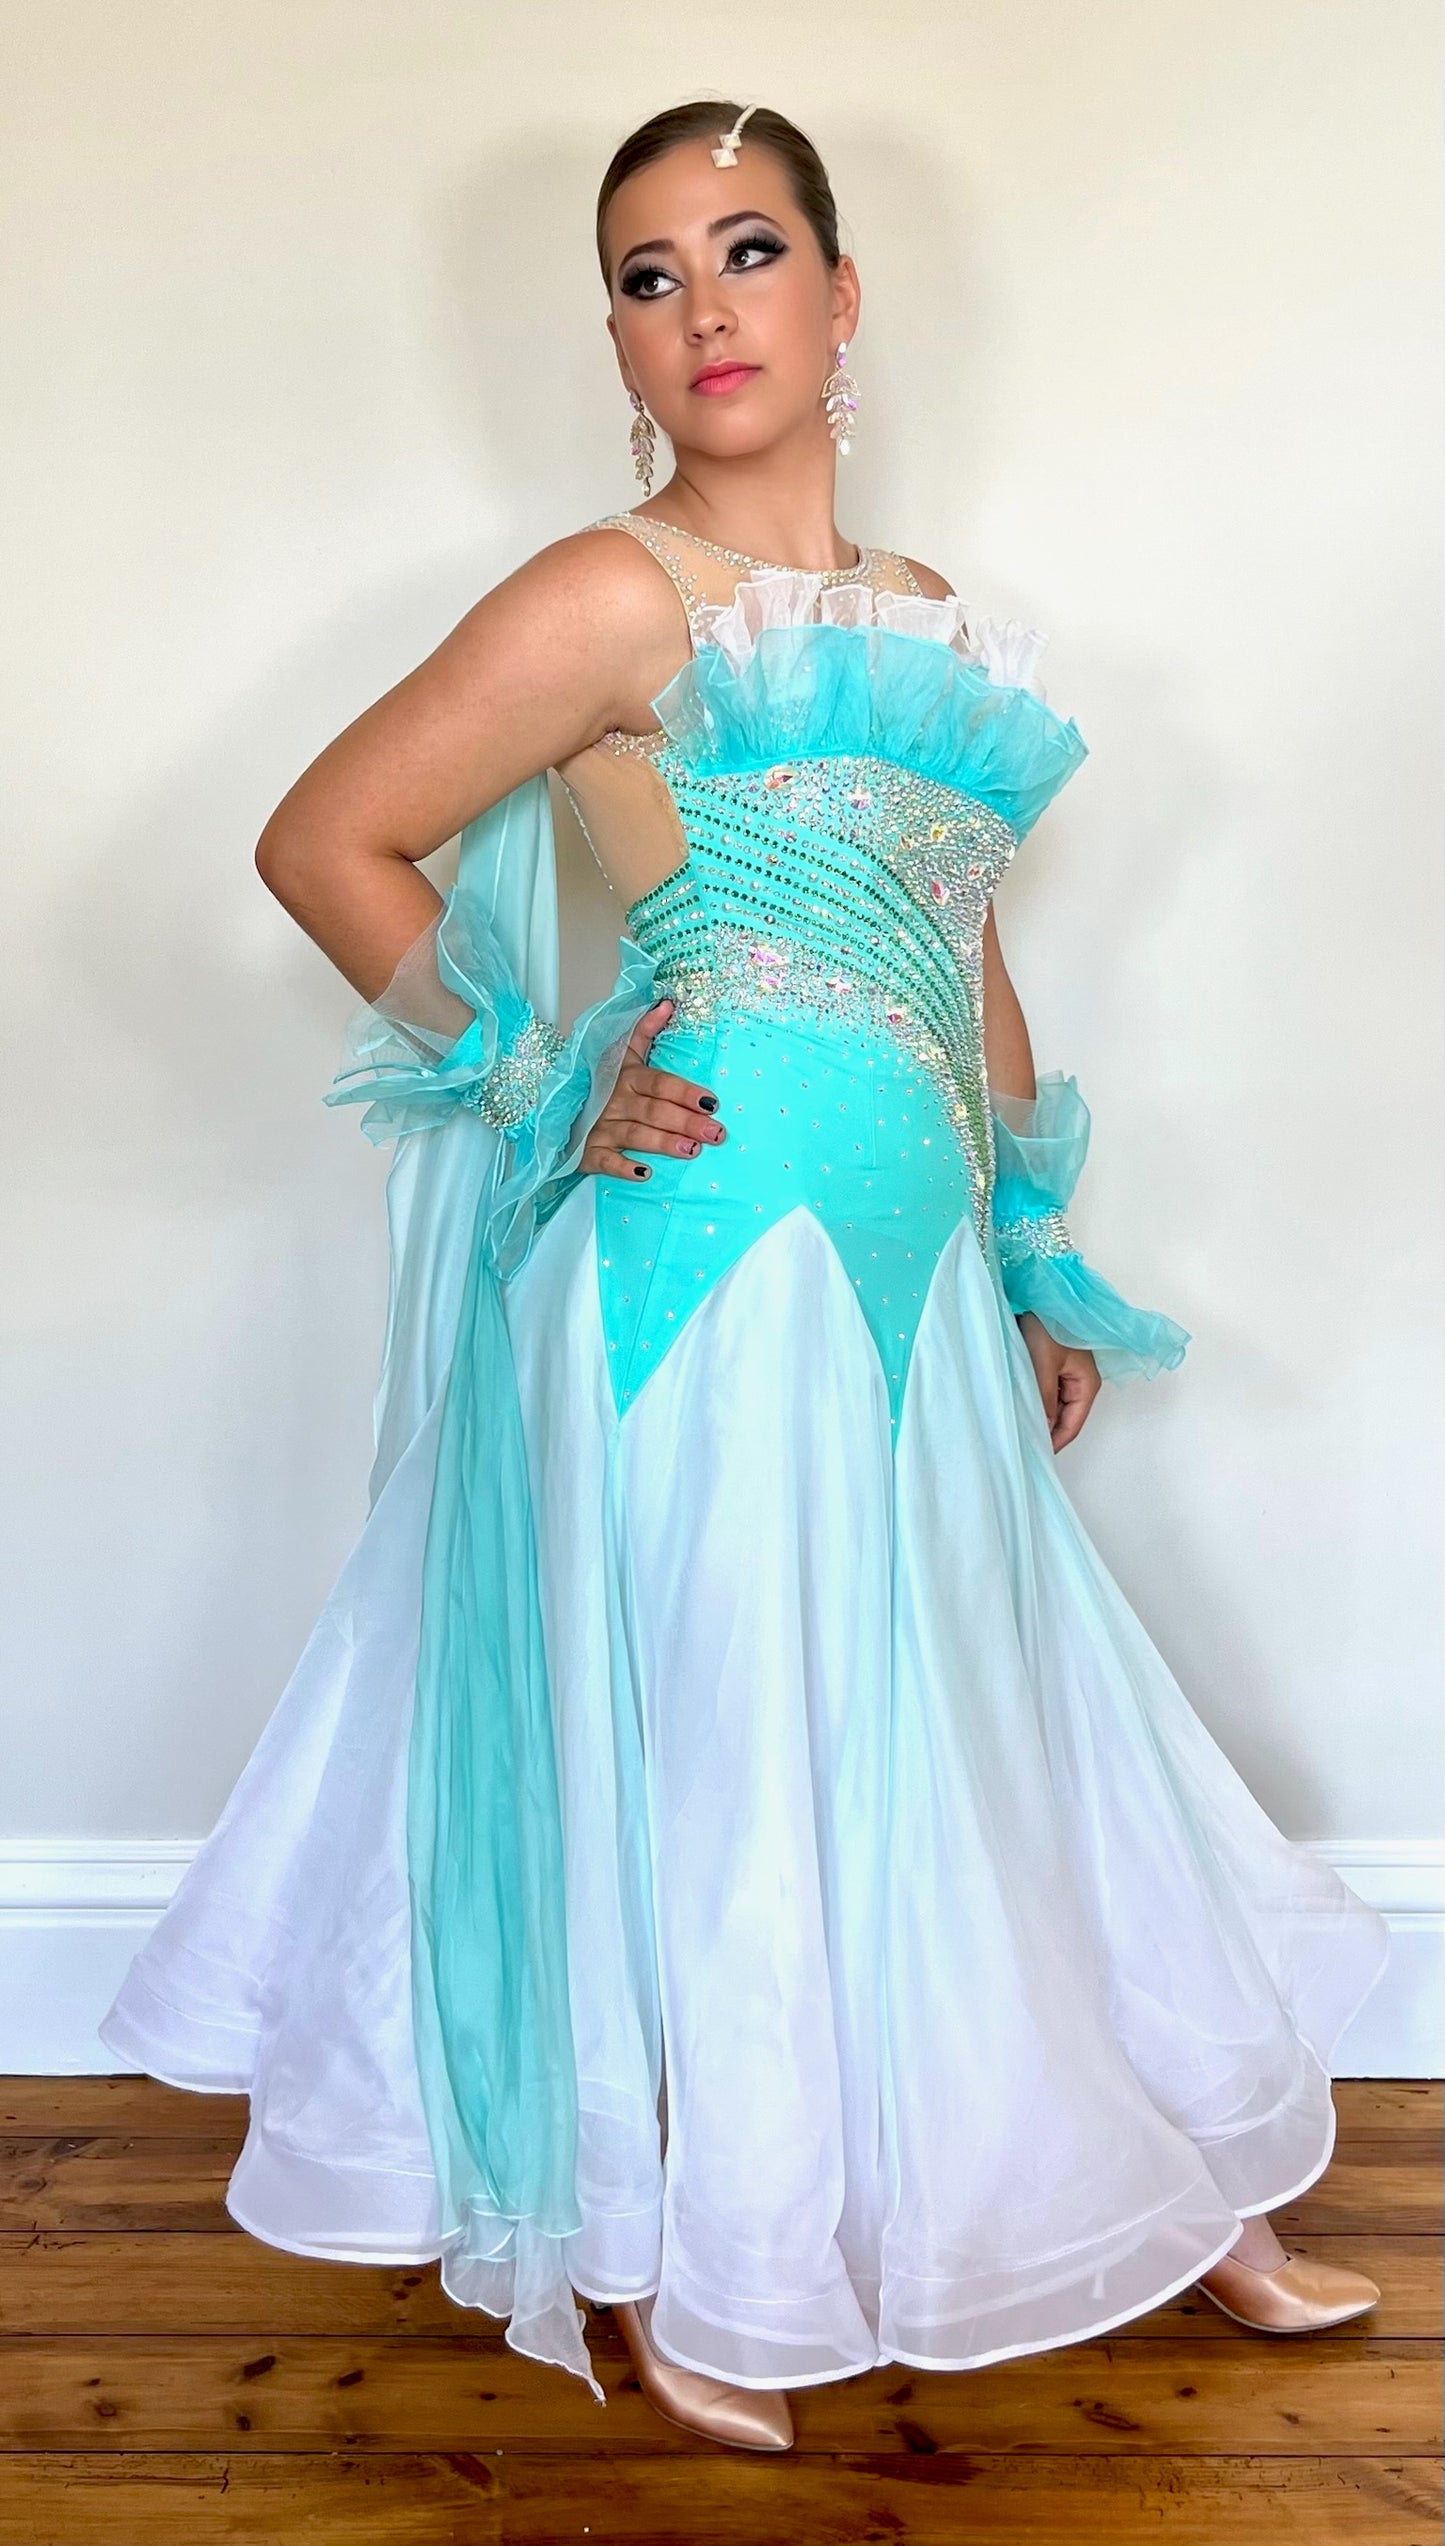 043 Bright Aqua & Green & White Ombré Ballroom Dress. Organza frill detailing to the upper chest. Decorative organza cuffs with ombré floats attached to the back on one side. Separate hanging float to the opposite side. Decorated in AB stones.